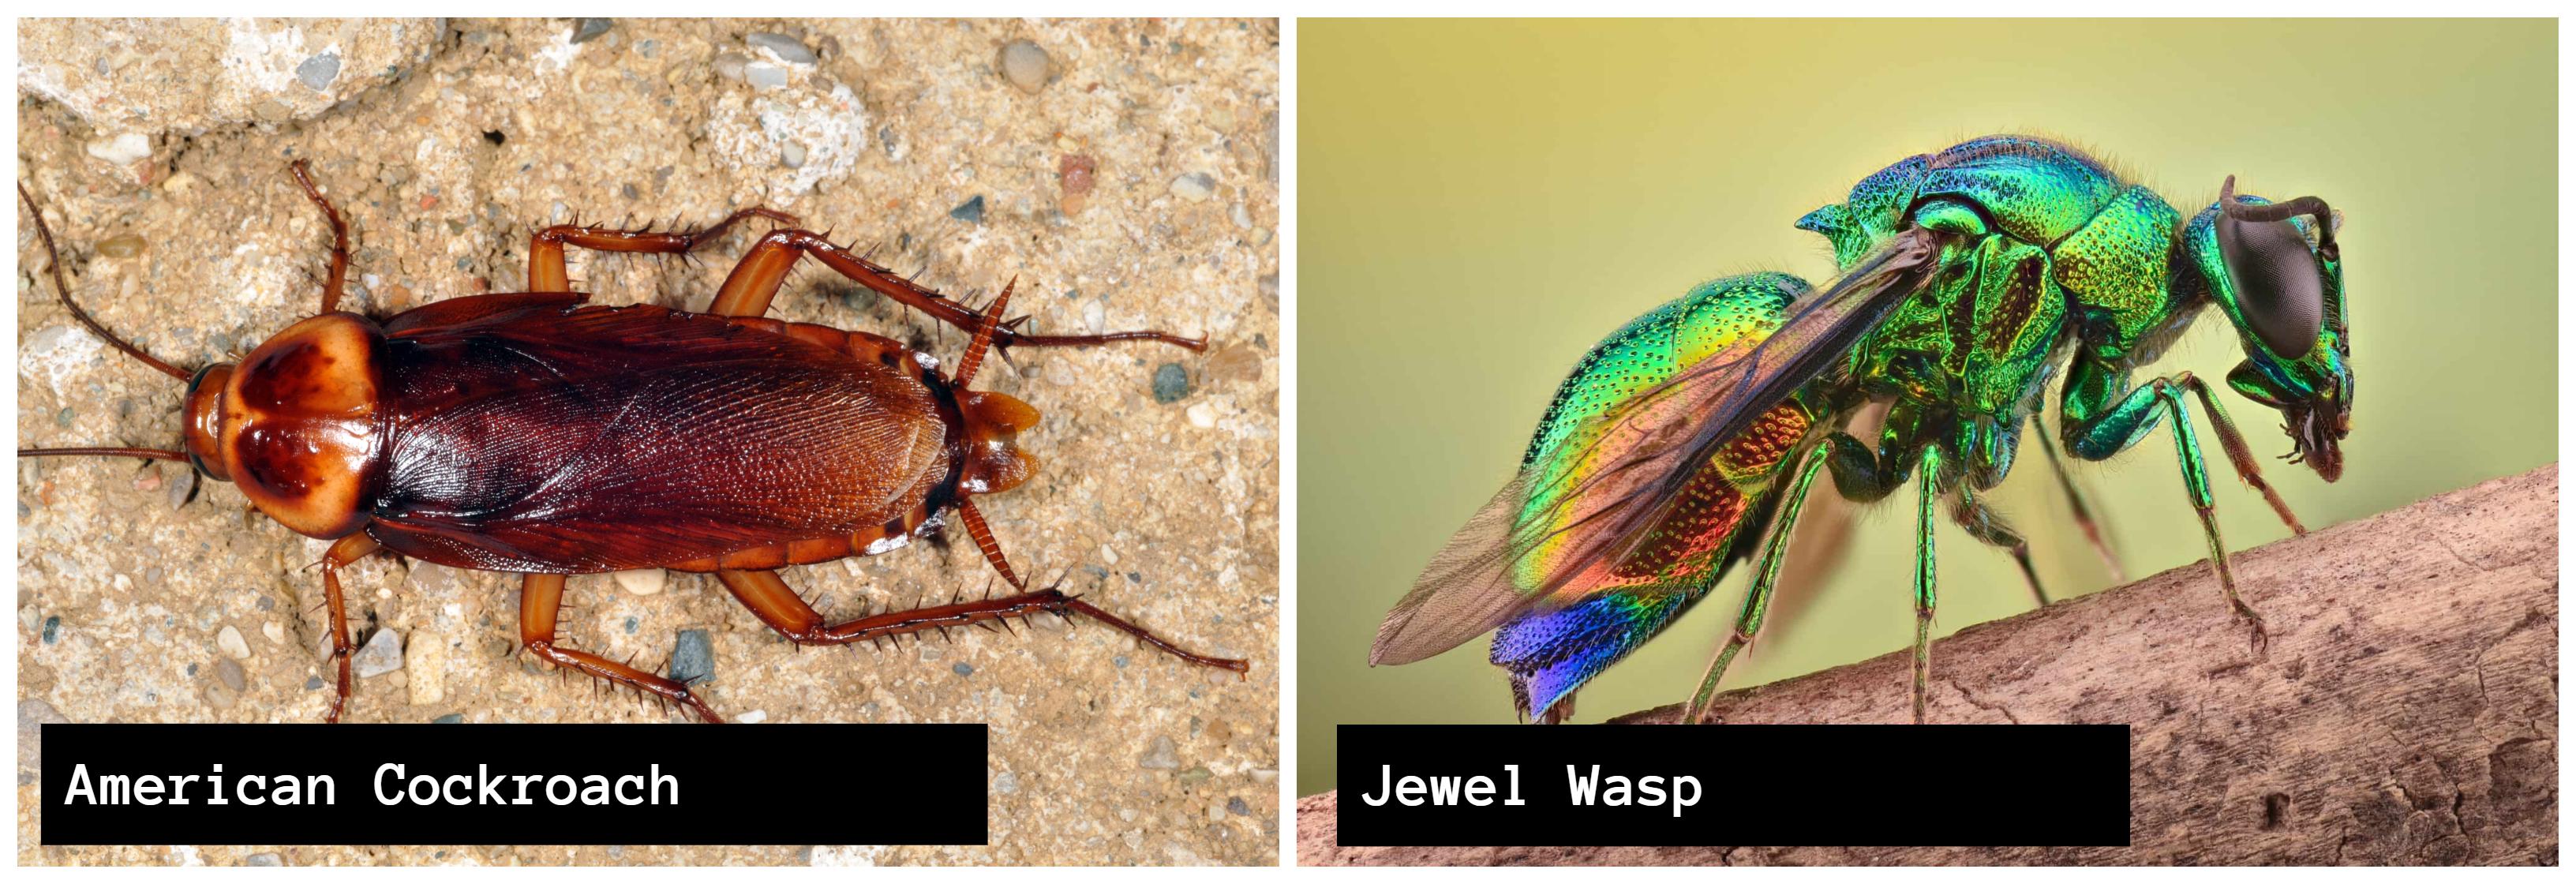 American Cockroaches and Jewel Wasps